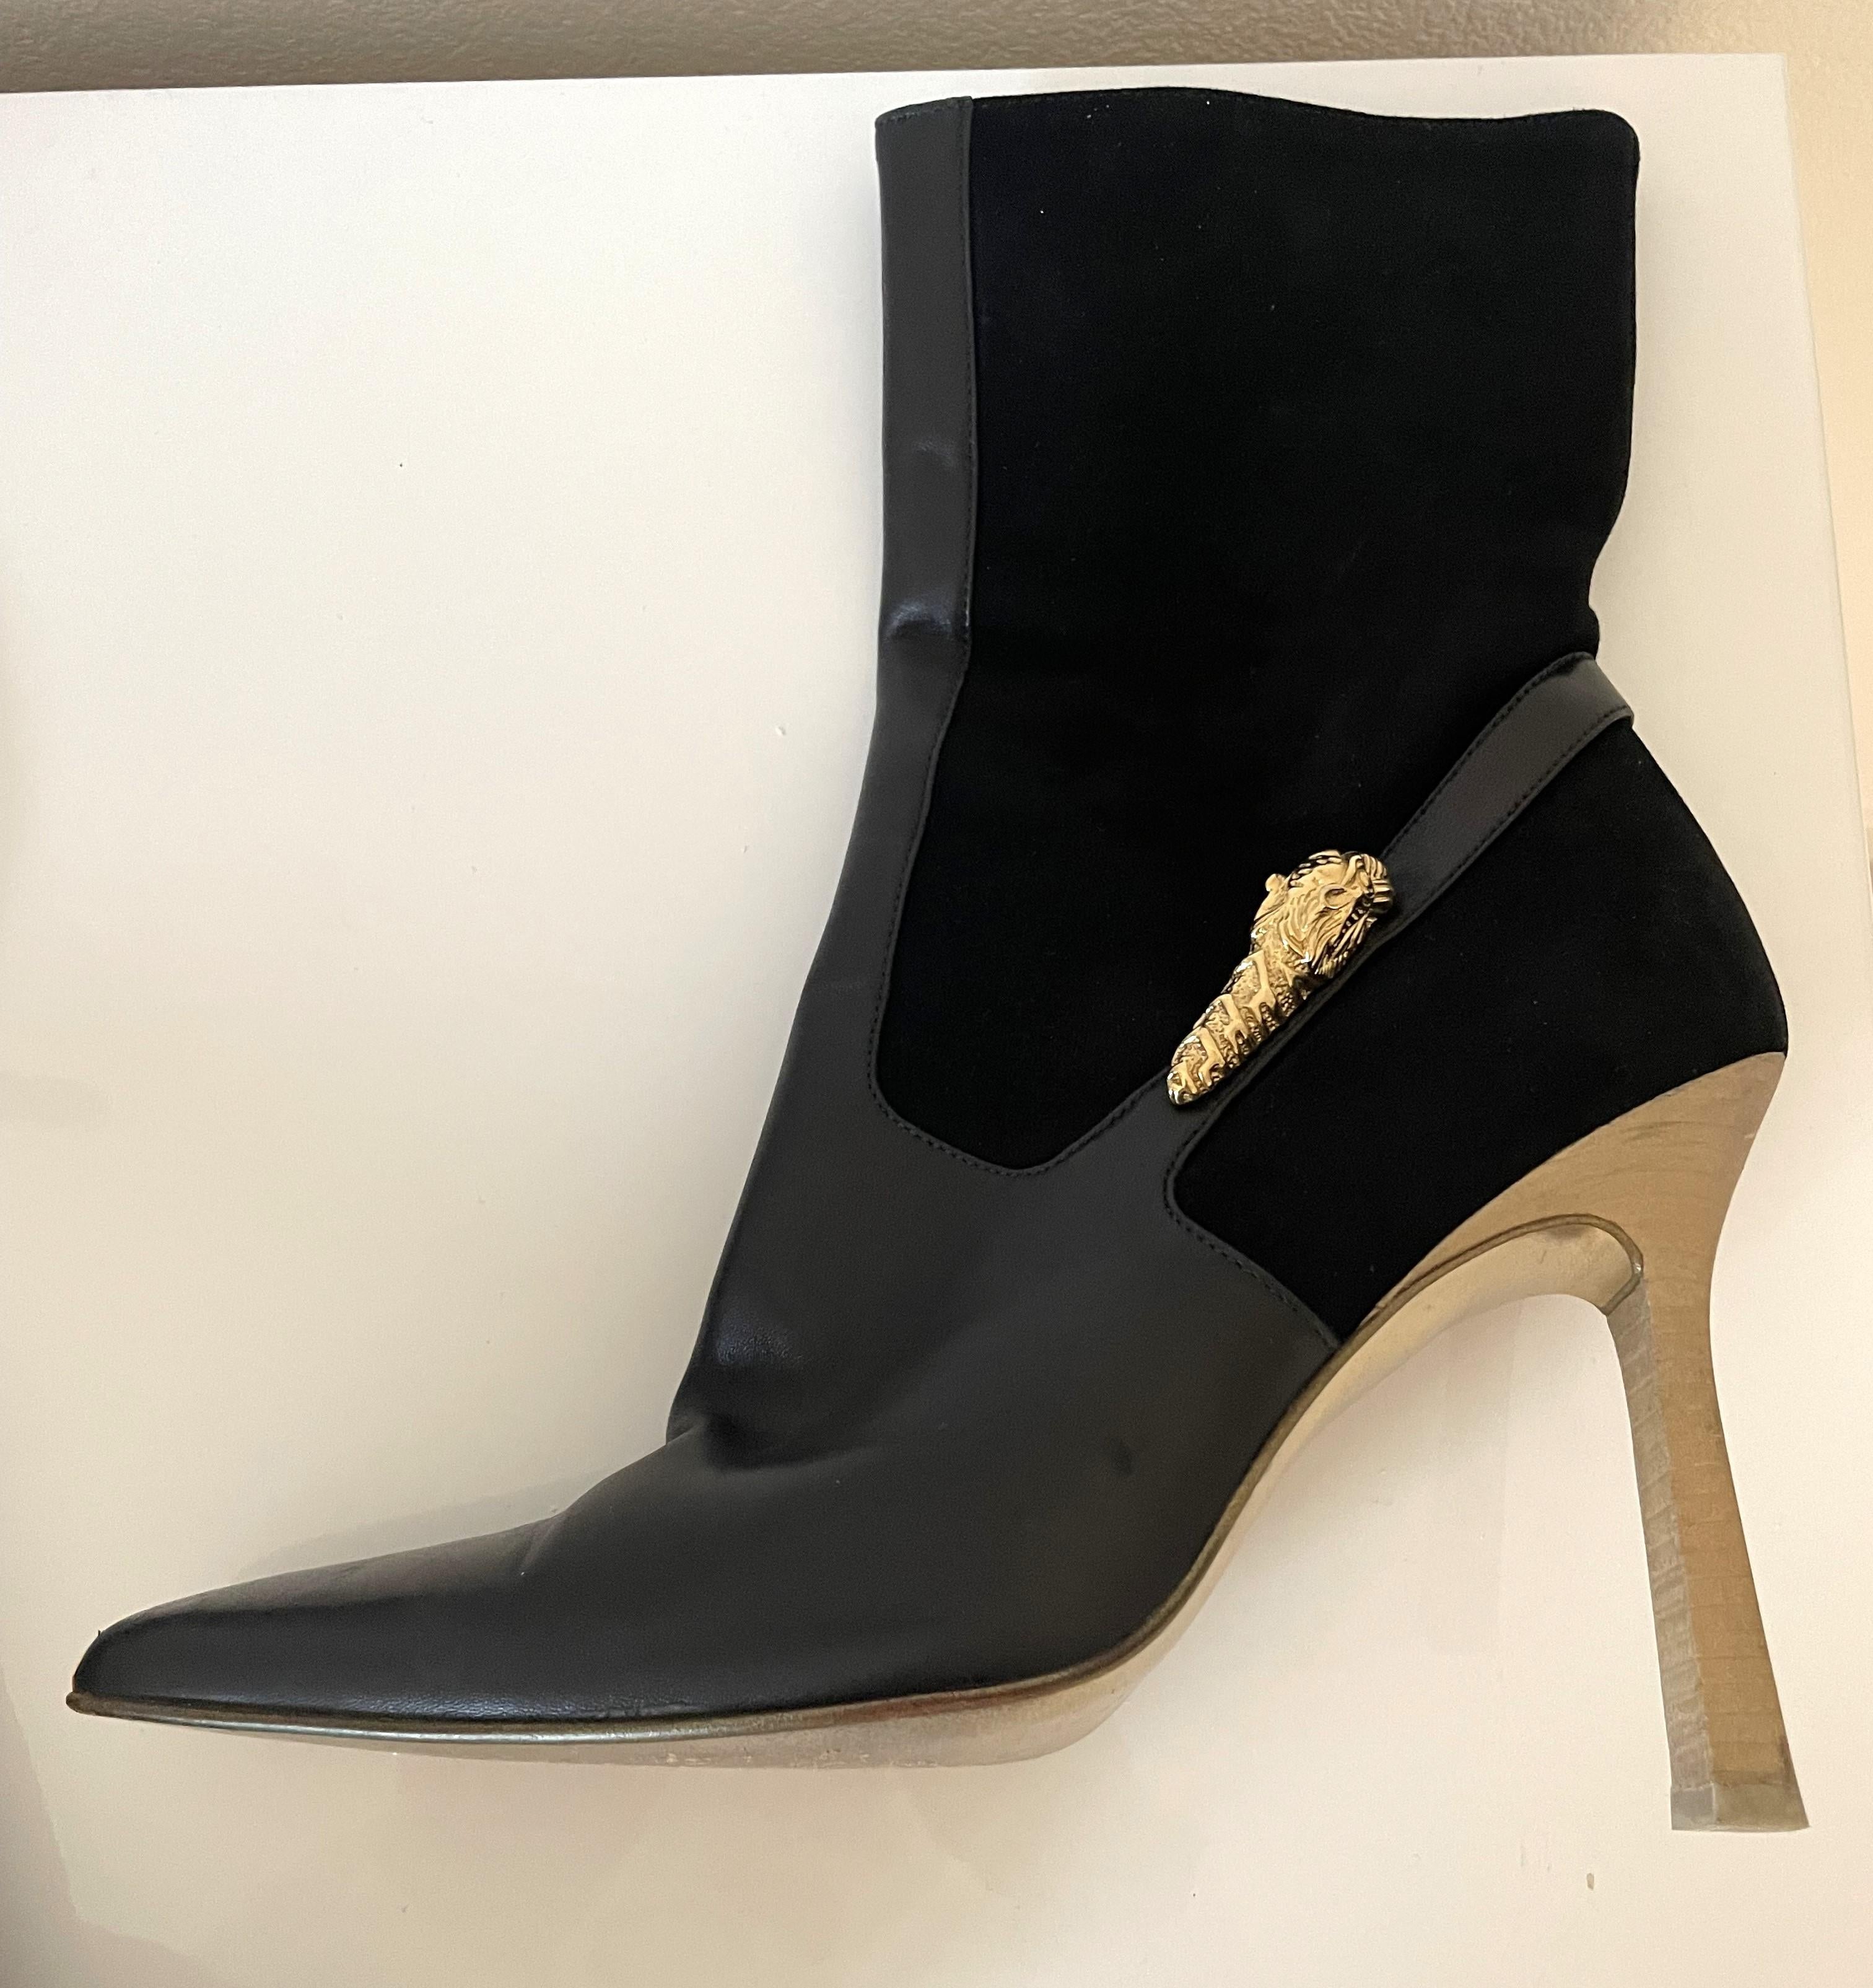 Gucci Rare Black Suede Leather High Heel Ankle Boots Gold Metal Panther Pour femmes en vente